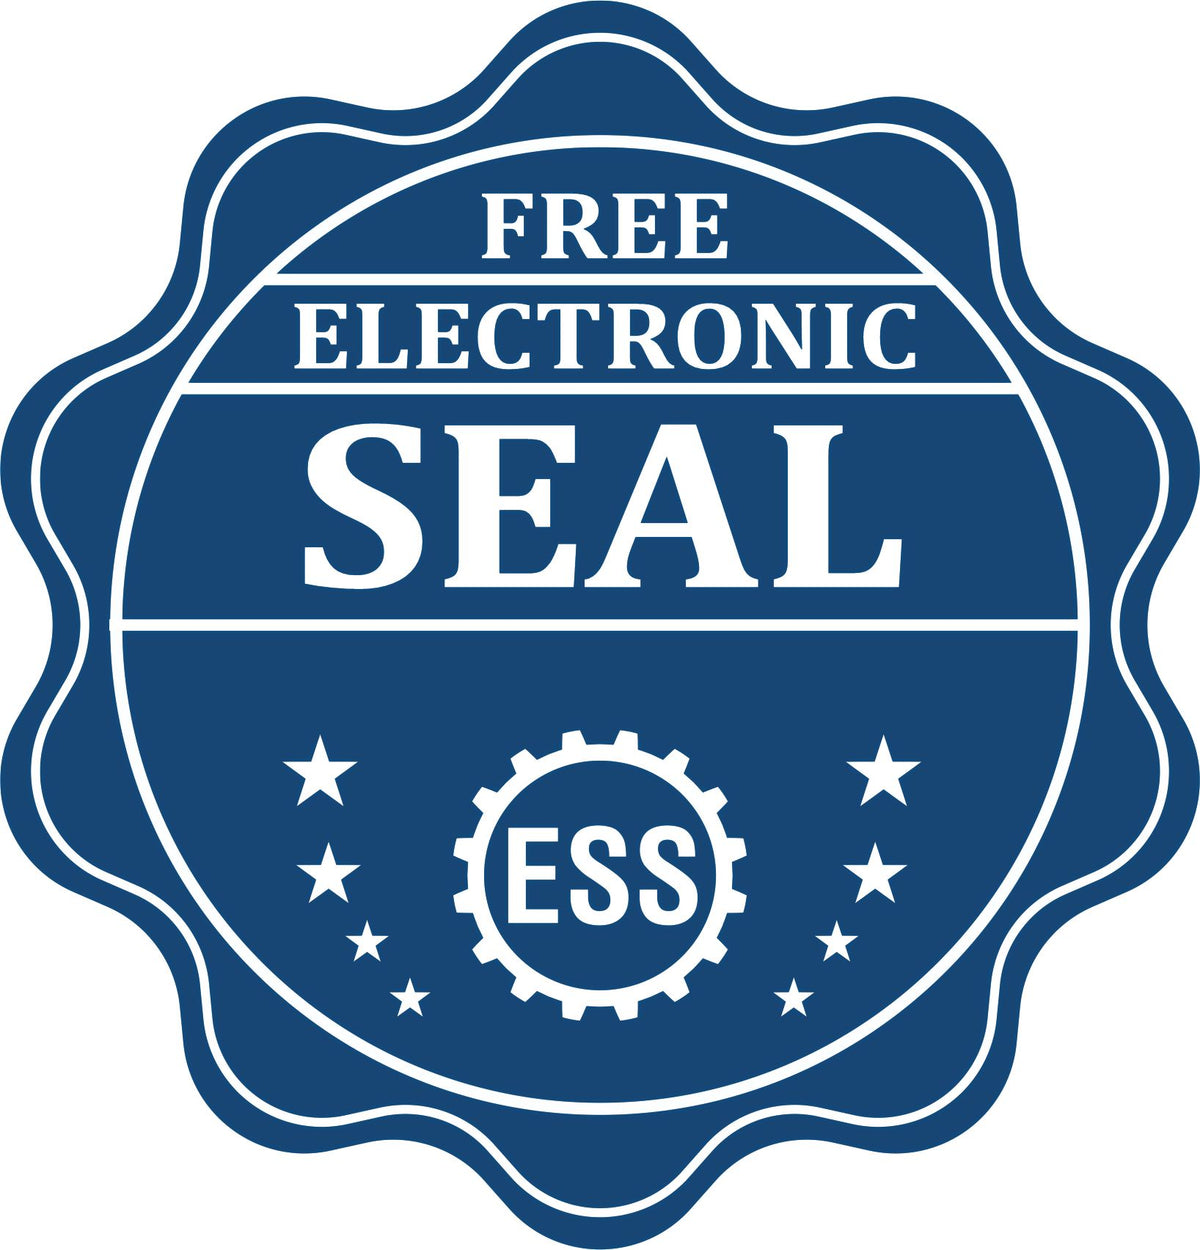 A badge showing a free electronic seal for the MaxLight Premium Pre-Inked Mississippi State Seal Notarial Stamp with stars and the ESS gear on the emblem.